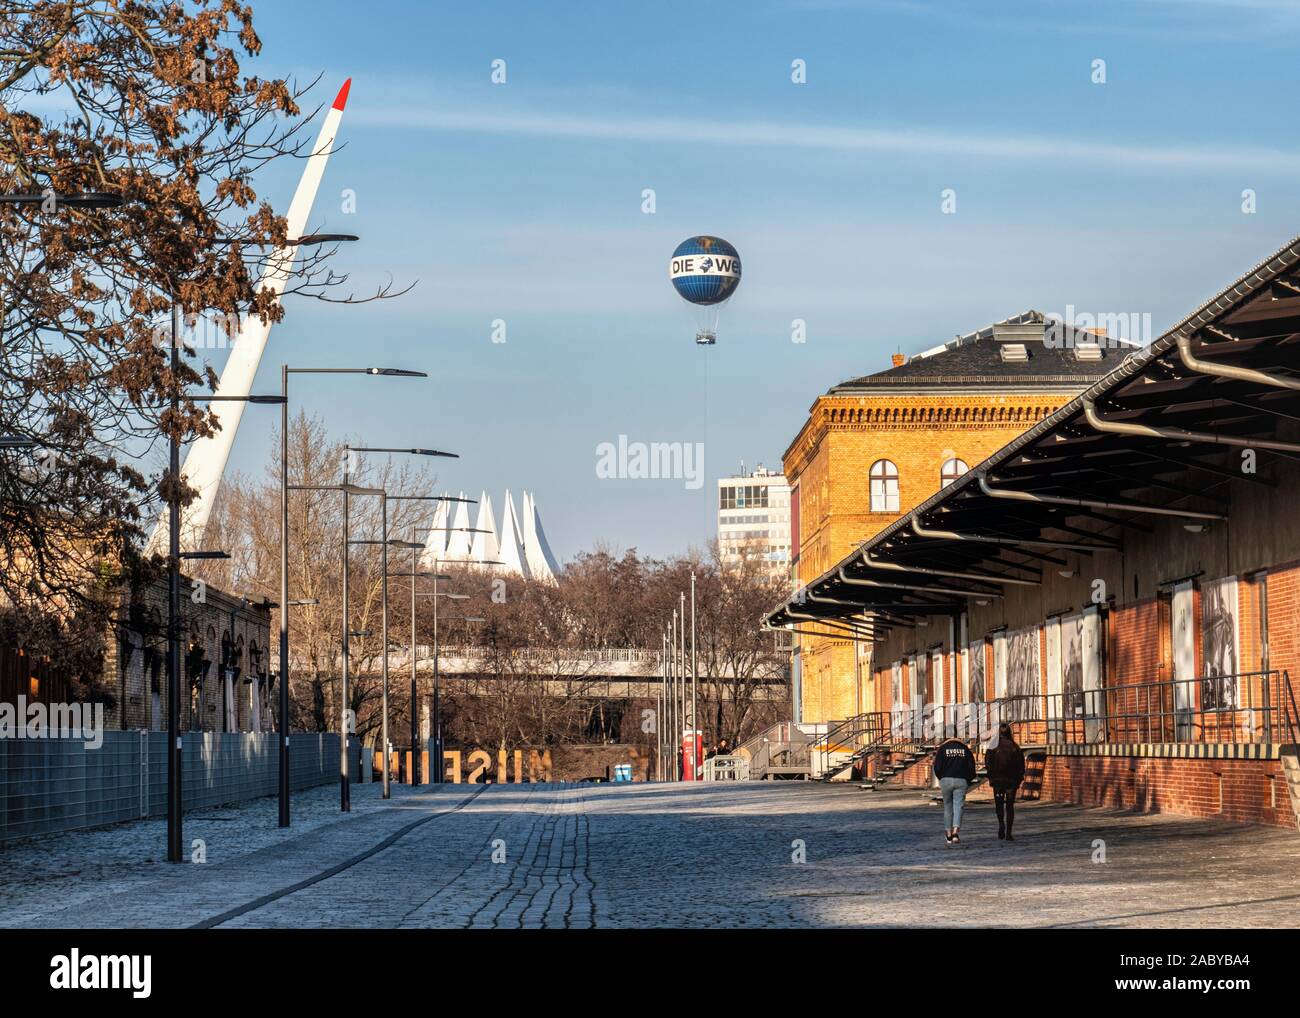 Wind Turbine blade, hot air balloon & Old freight yard buildings in grounds of German Museum of Science & Technology in Kreuzberg, Berlin. Stock Photo